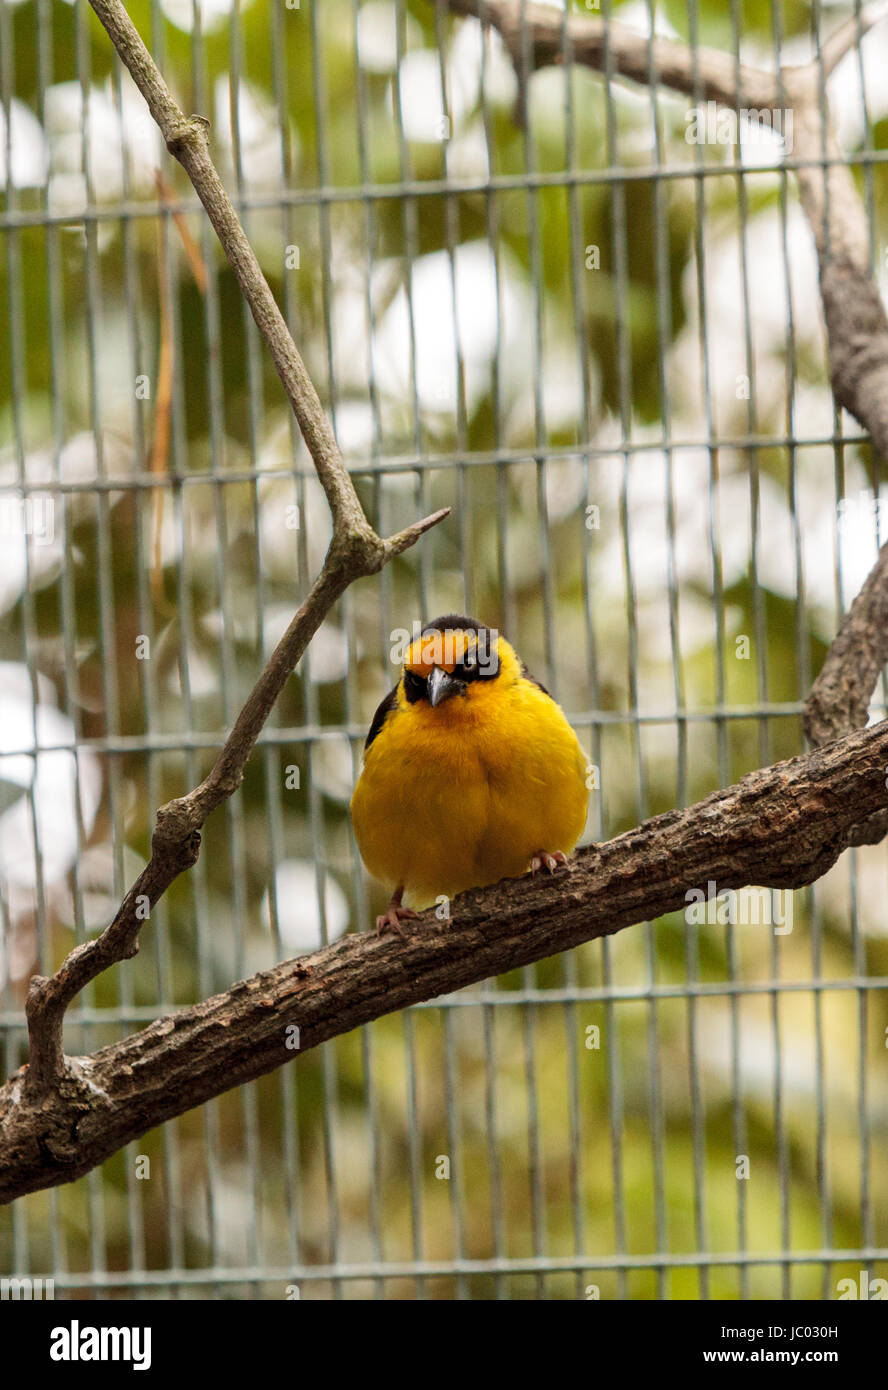 African golden oriole is a bright yellow bird with a black mask known scientifically as Oriolus auratus. Stock Photo